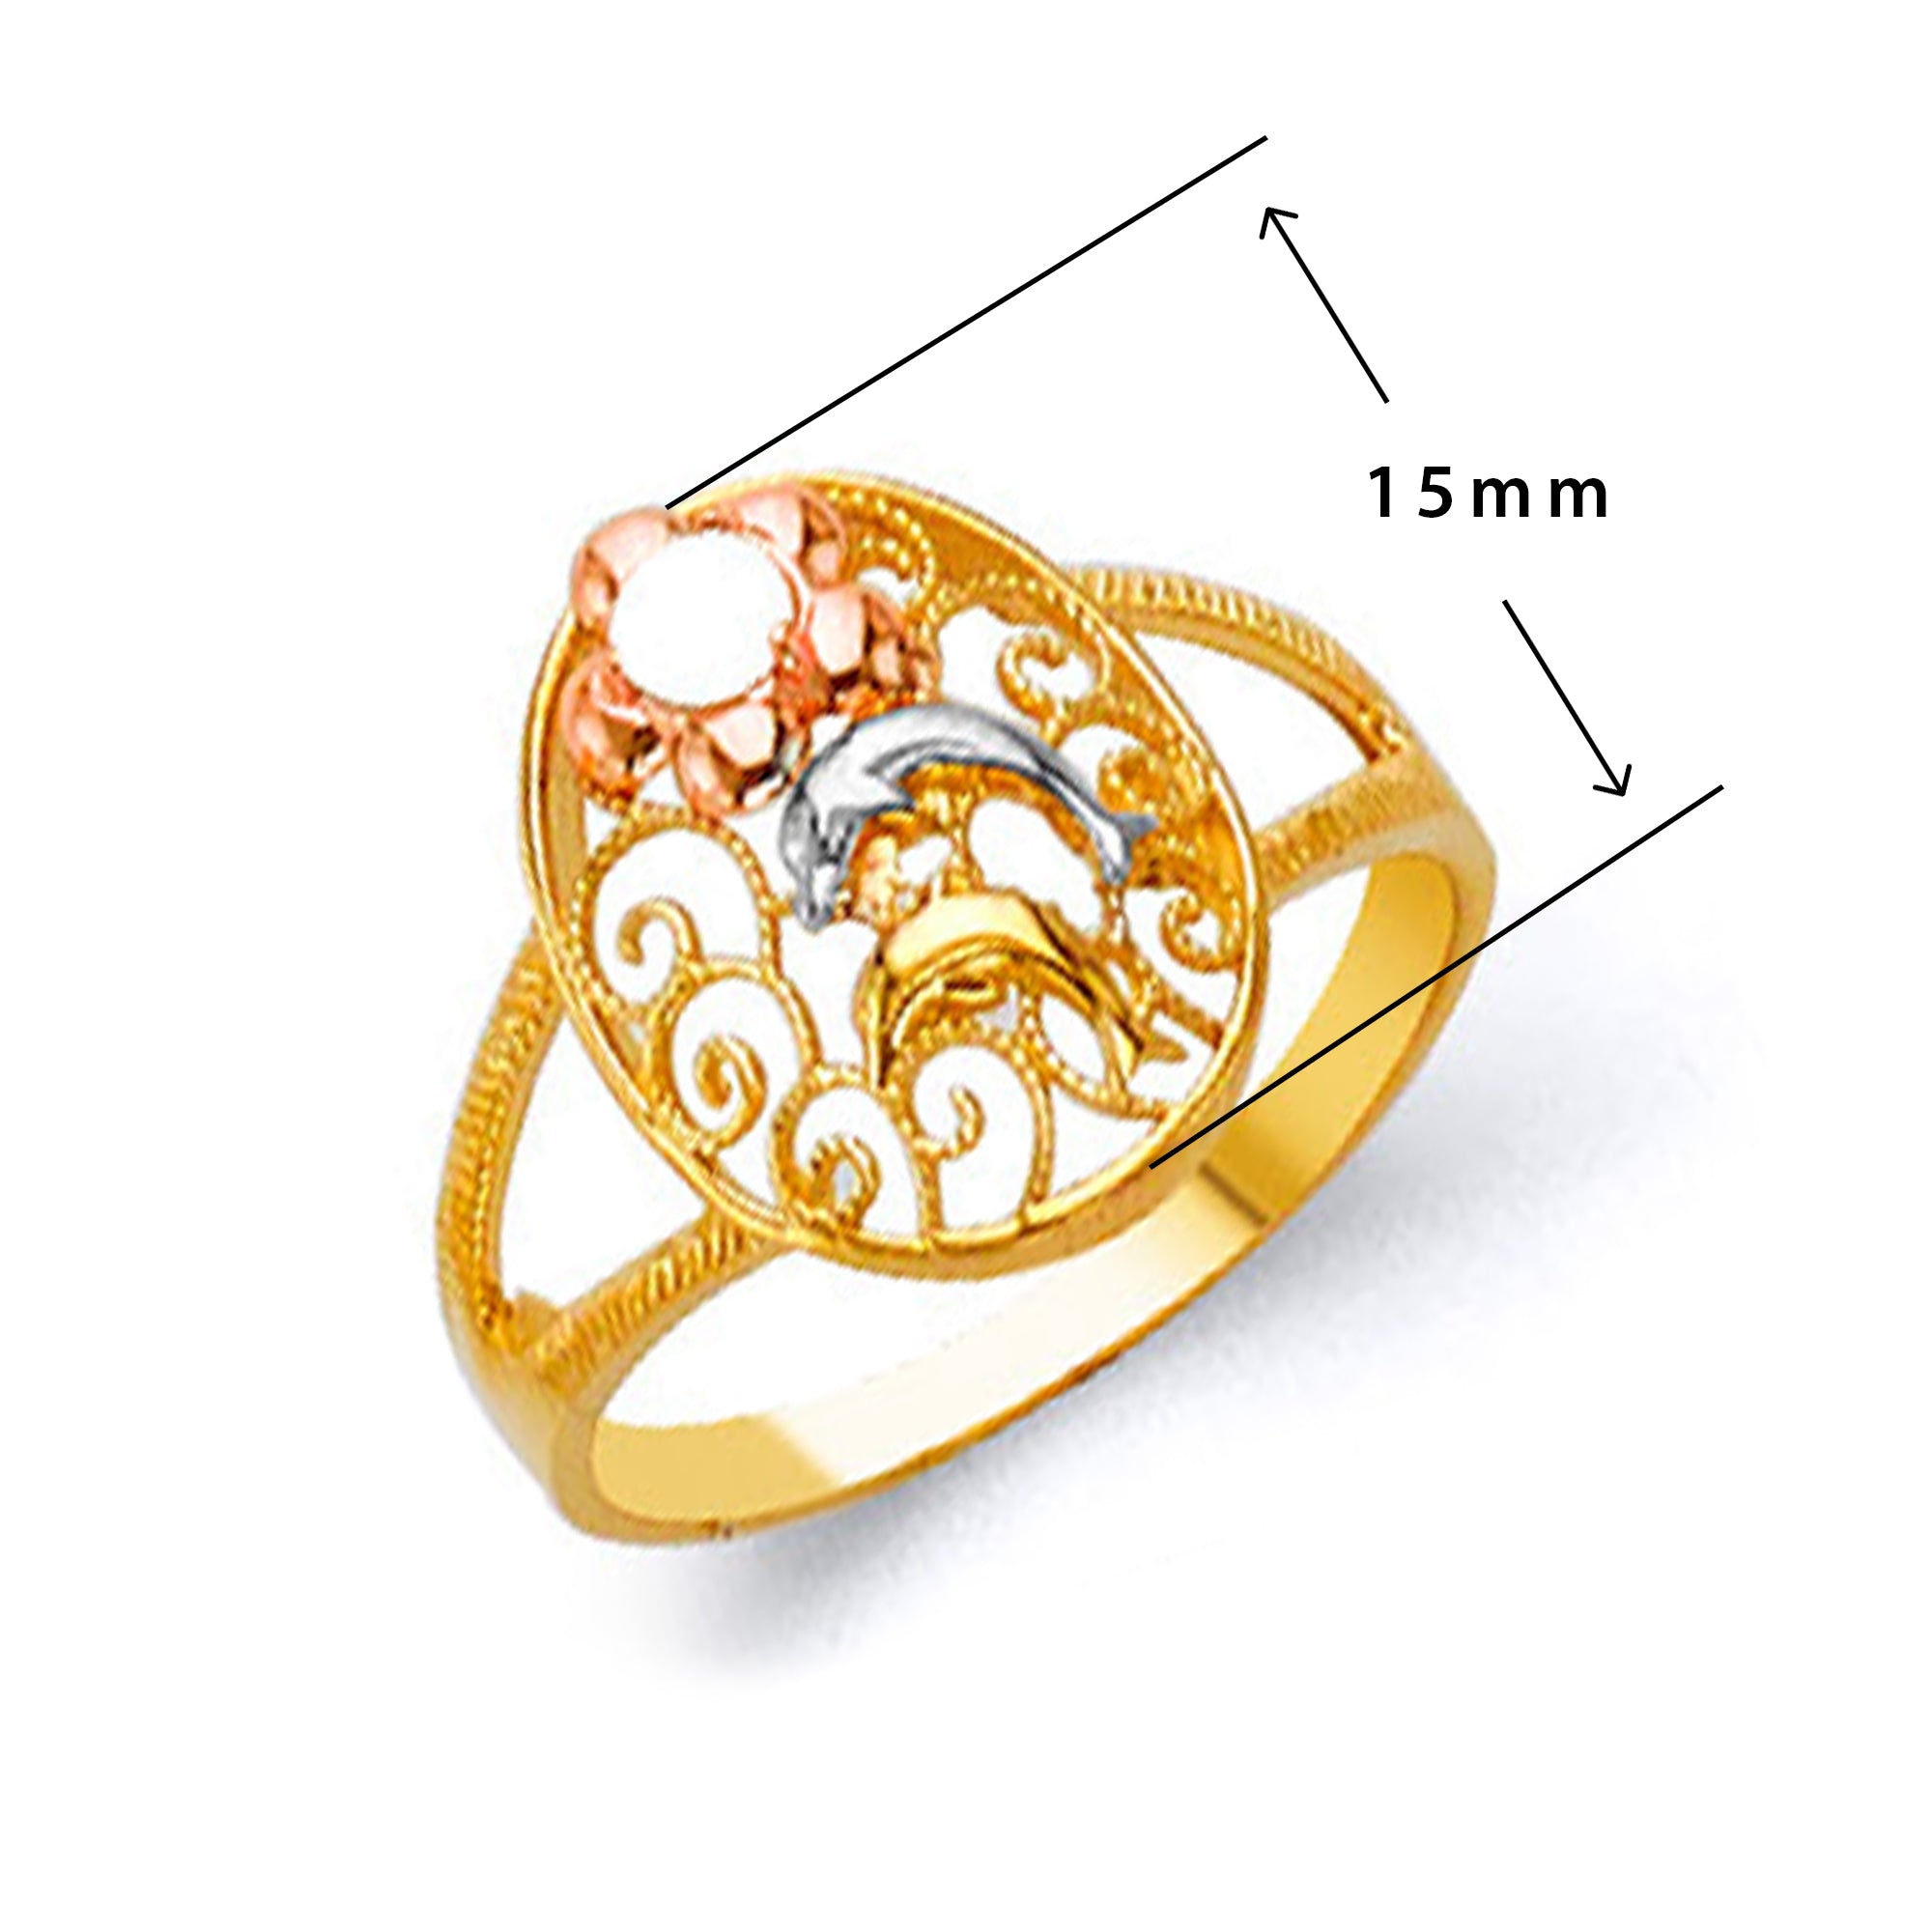 Hollow Patterned Ring in Solid Gold with Measurement